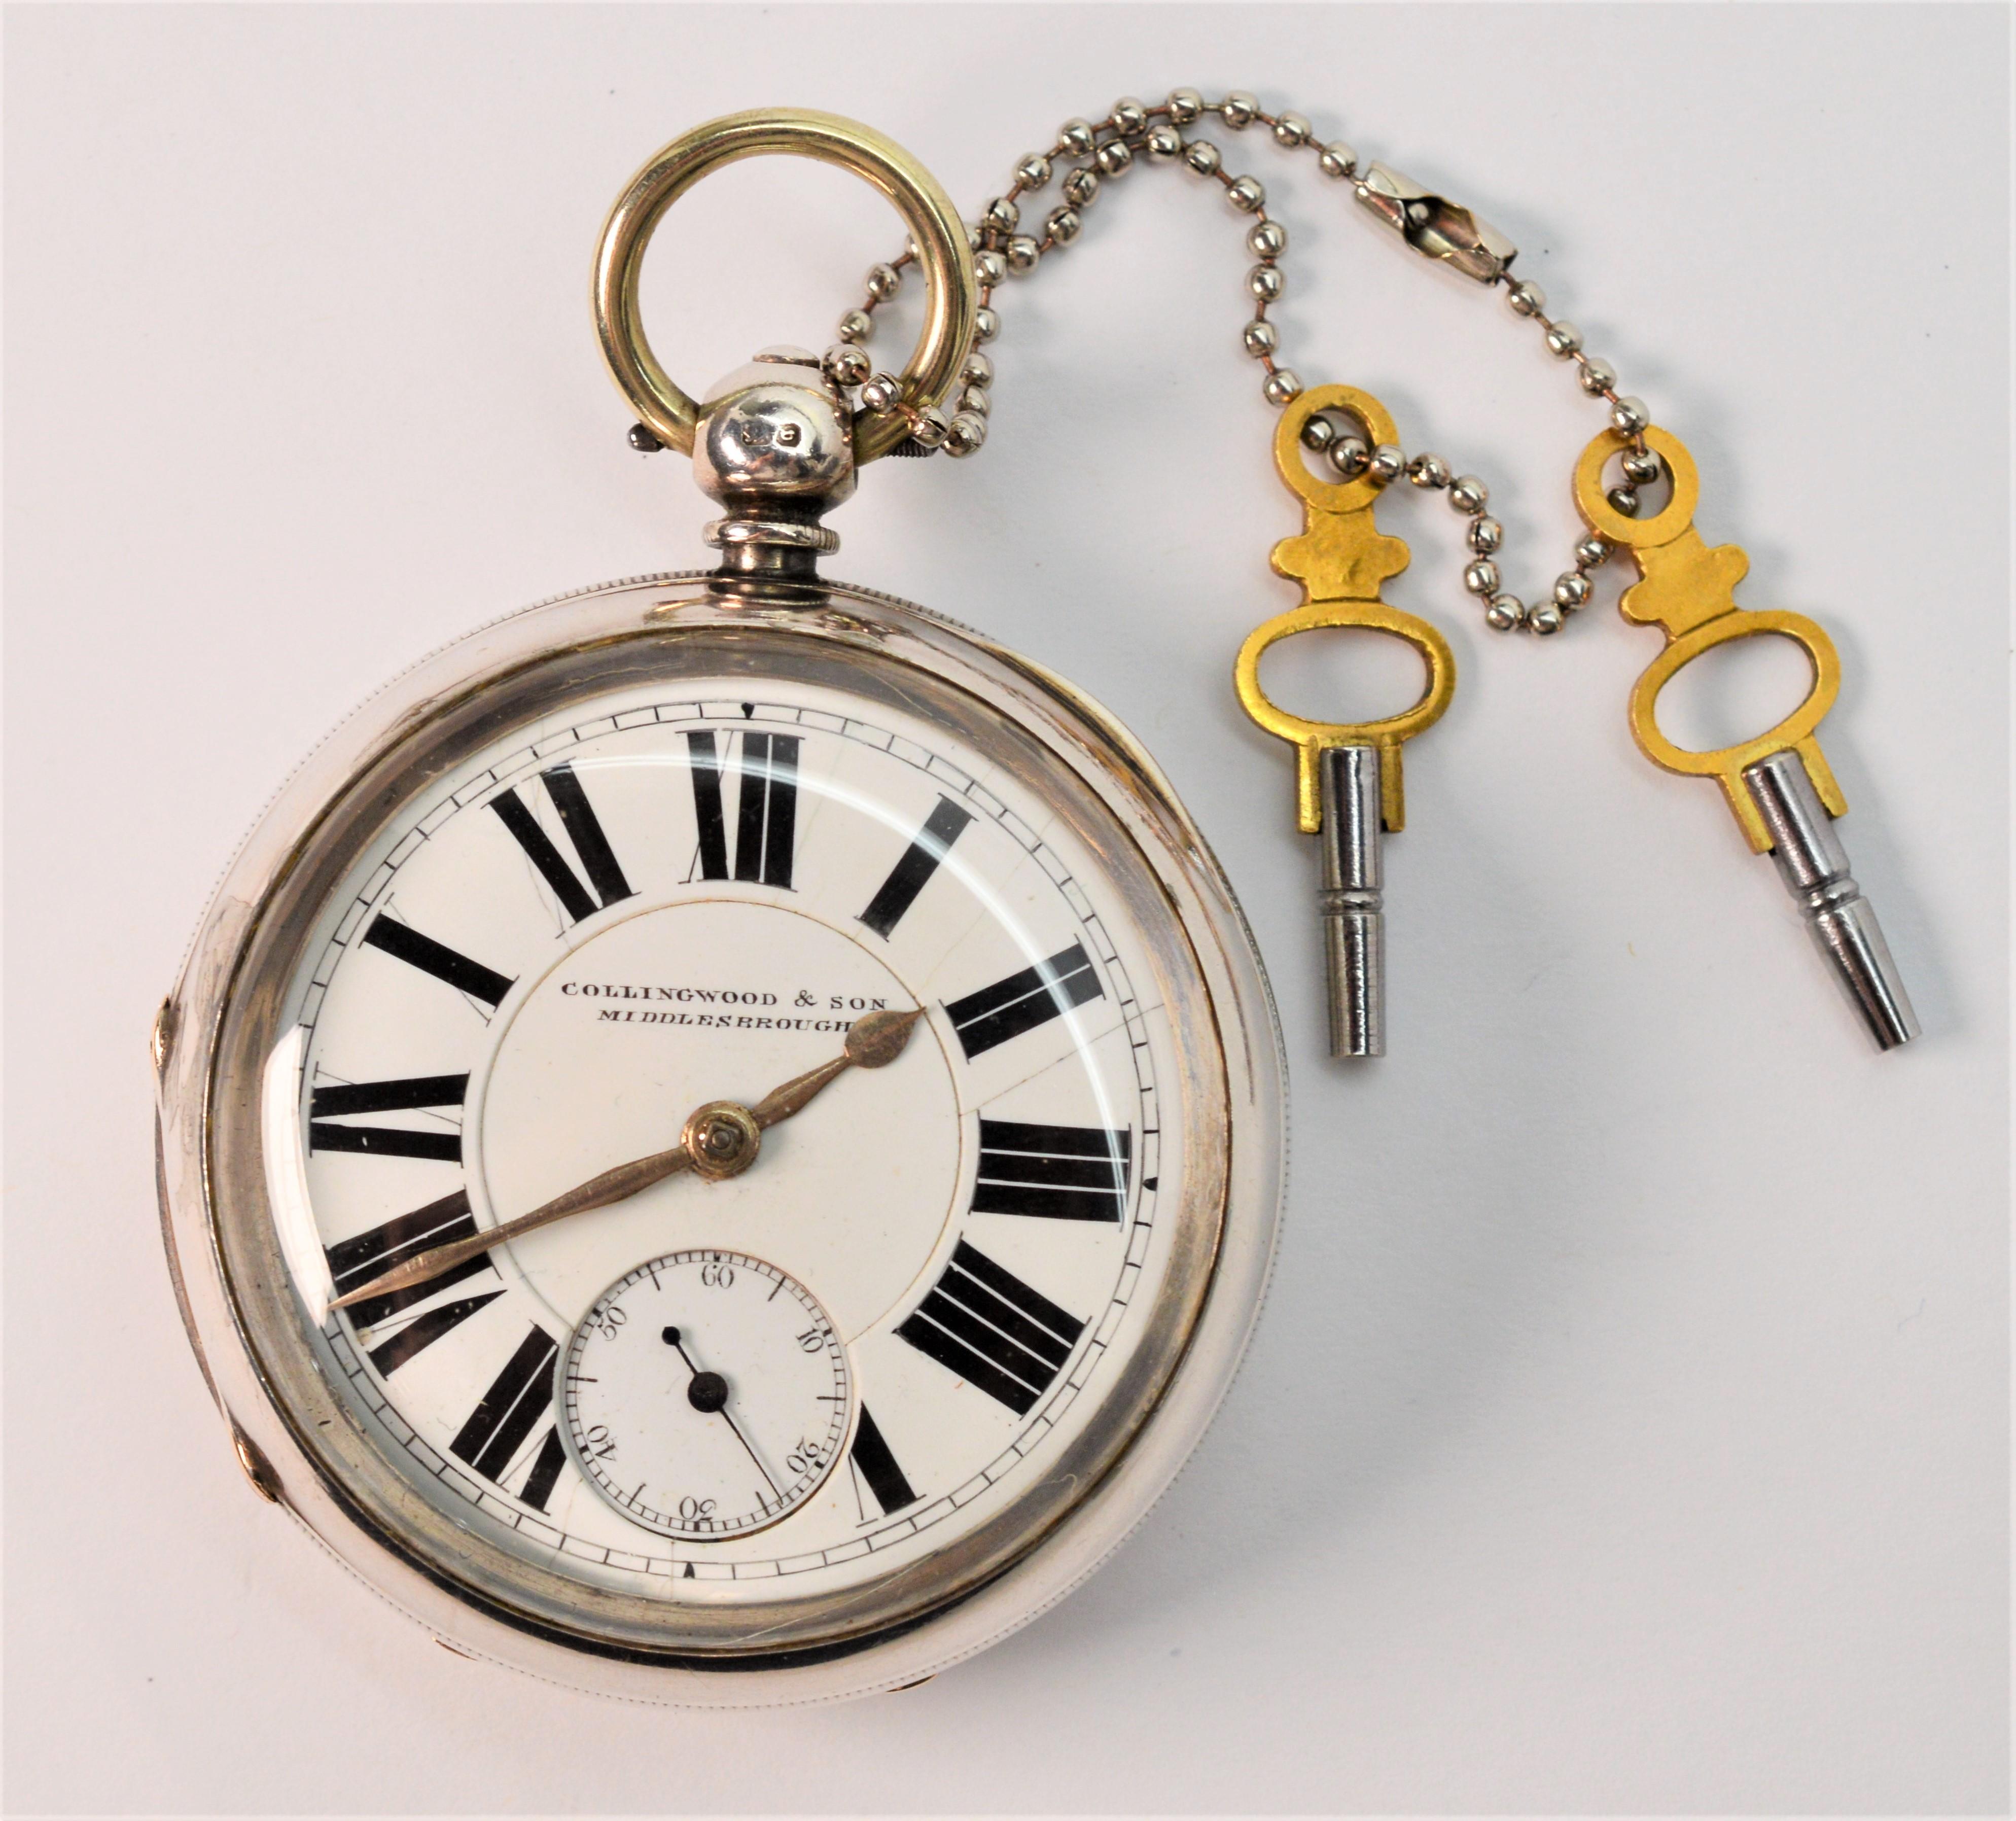 Outstanding antique sterling silver pocket watch by Collinwood & Sons of Middleboush, England, previously own by an African American railroad conductor, circa 1900 and
was an estate purchase directly from his grandson, a US Postmaster. With an open